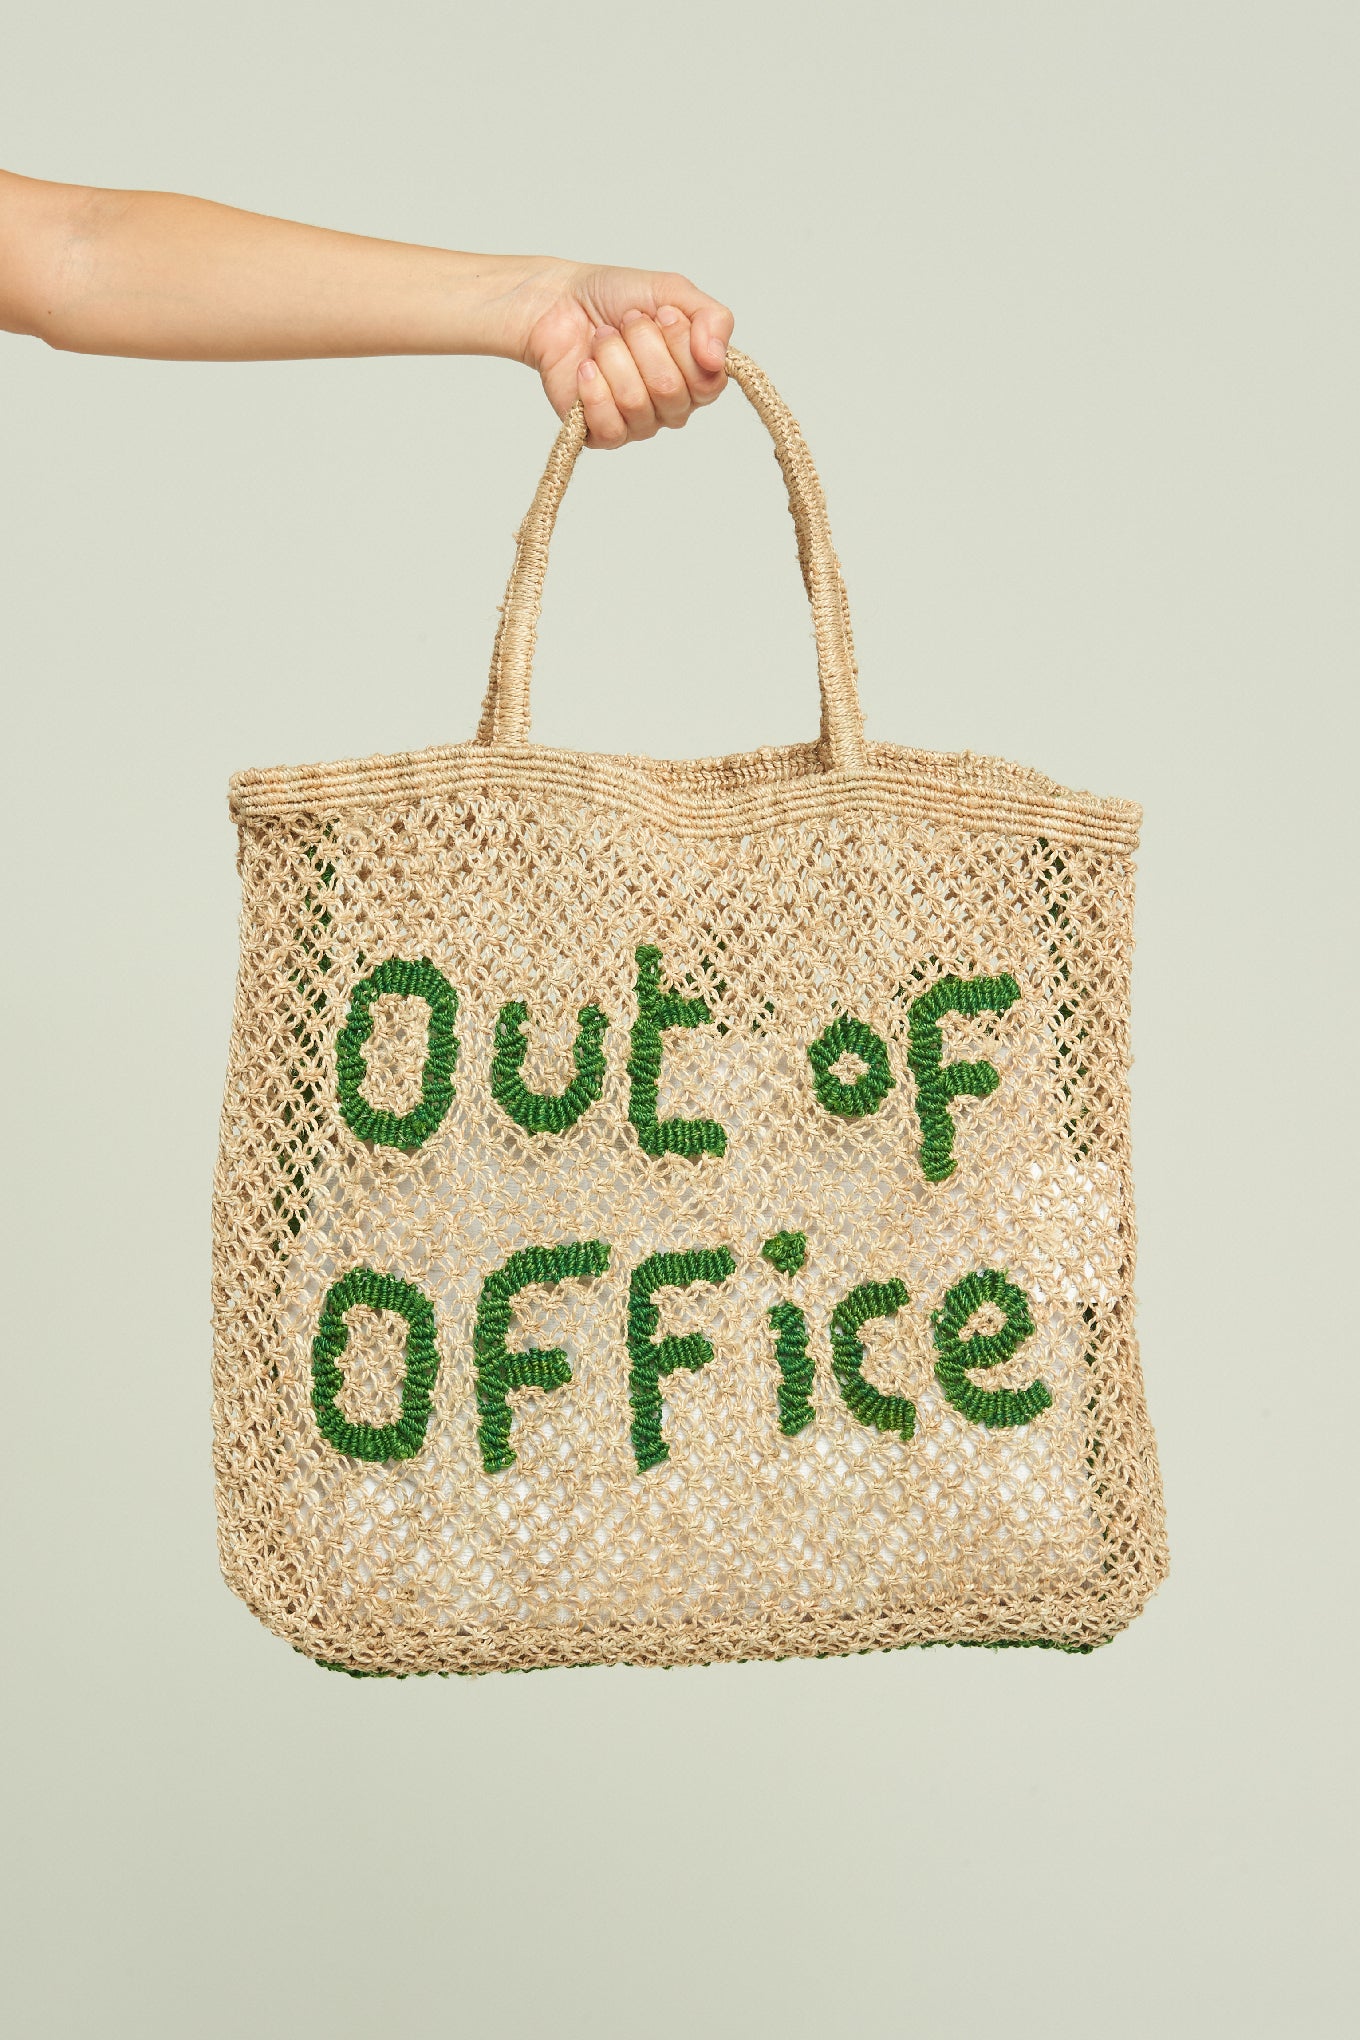 The Jacksons Out of Office Bag